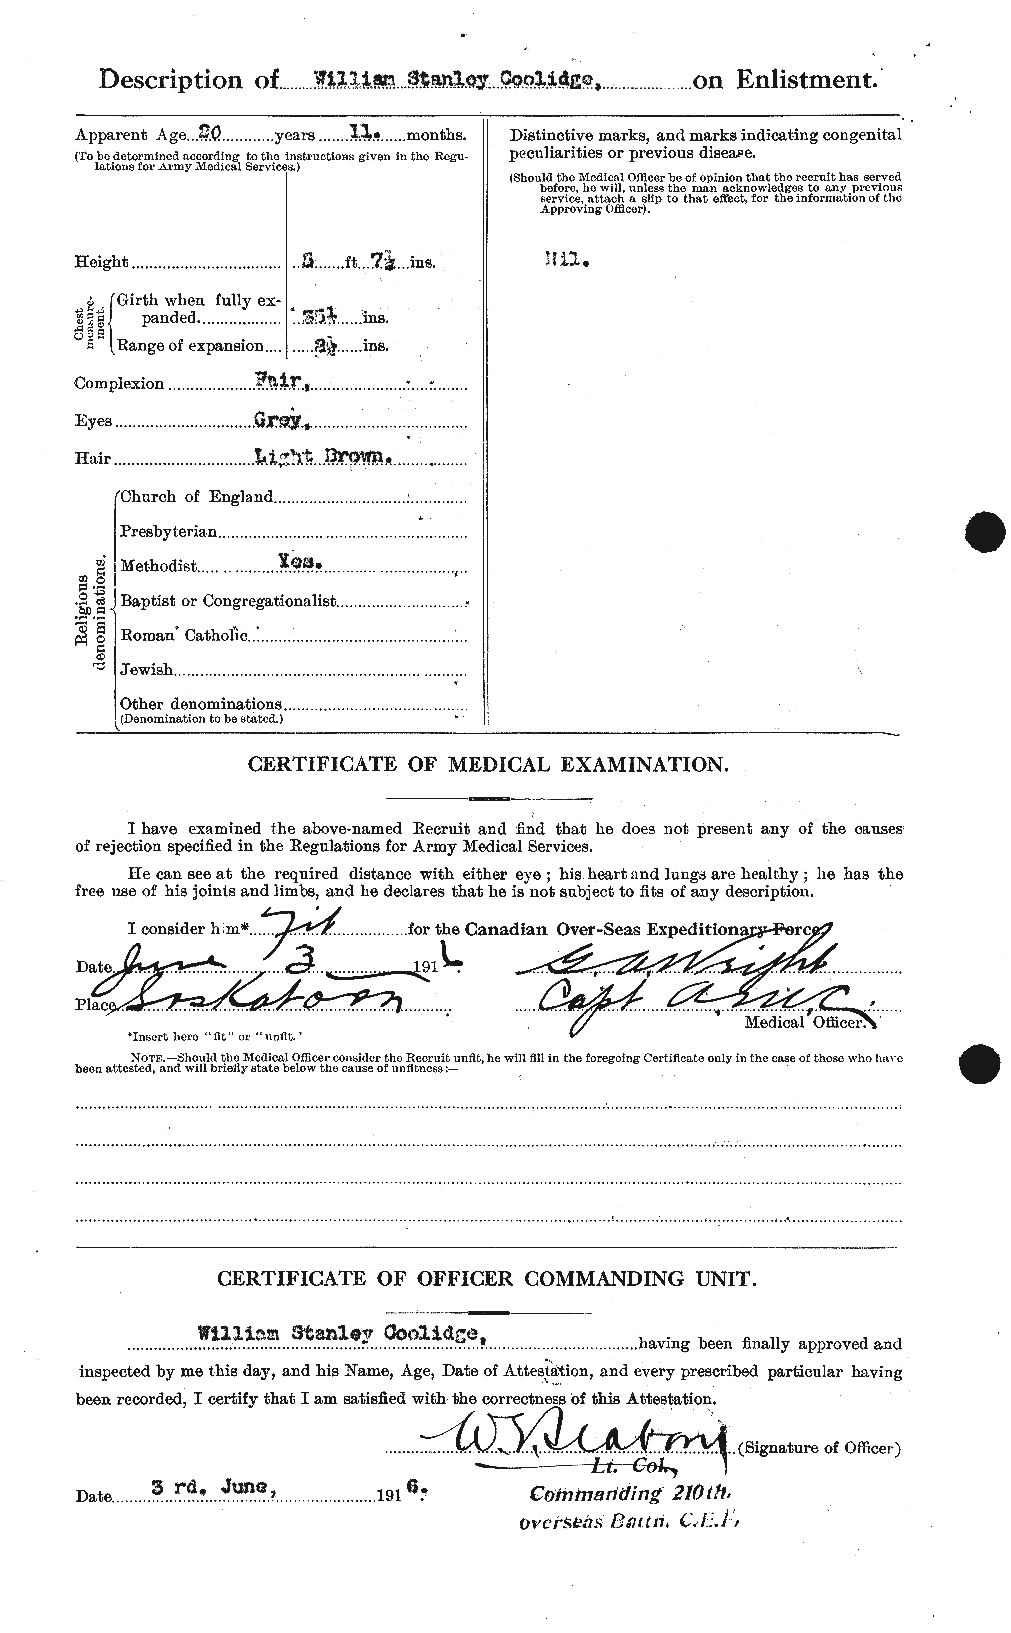 Personnel Records of the First World War - CEF 056131b